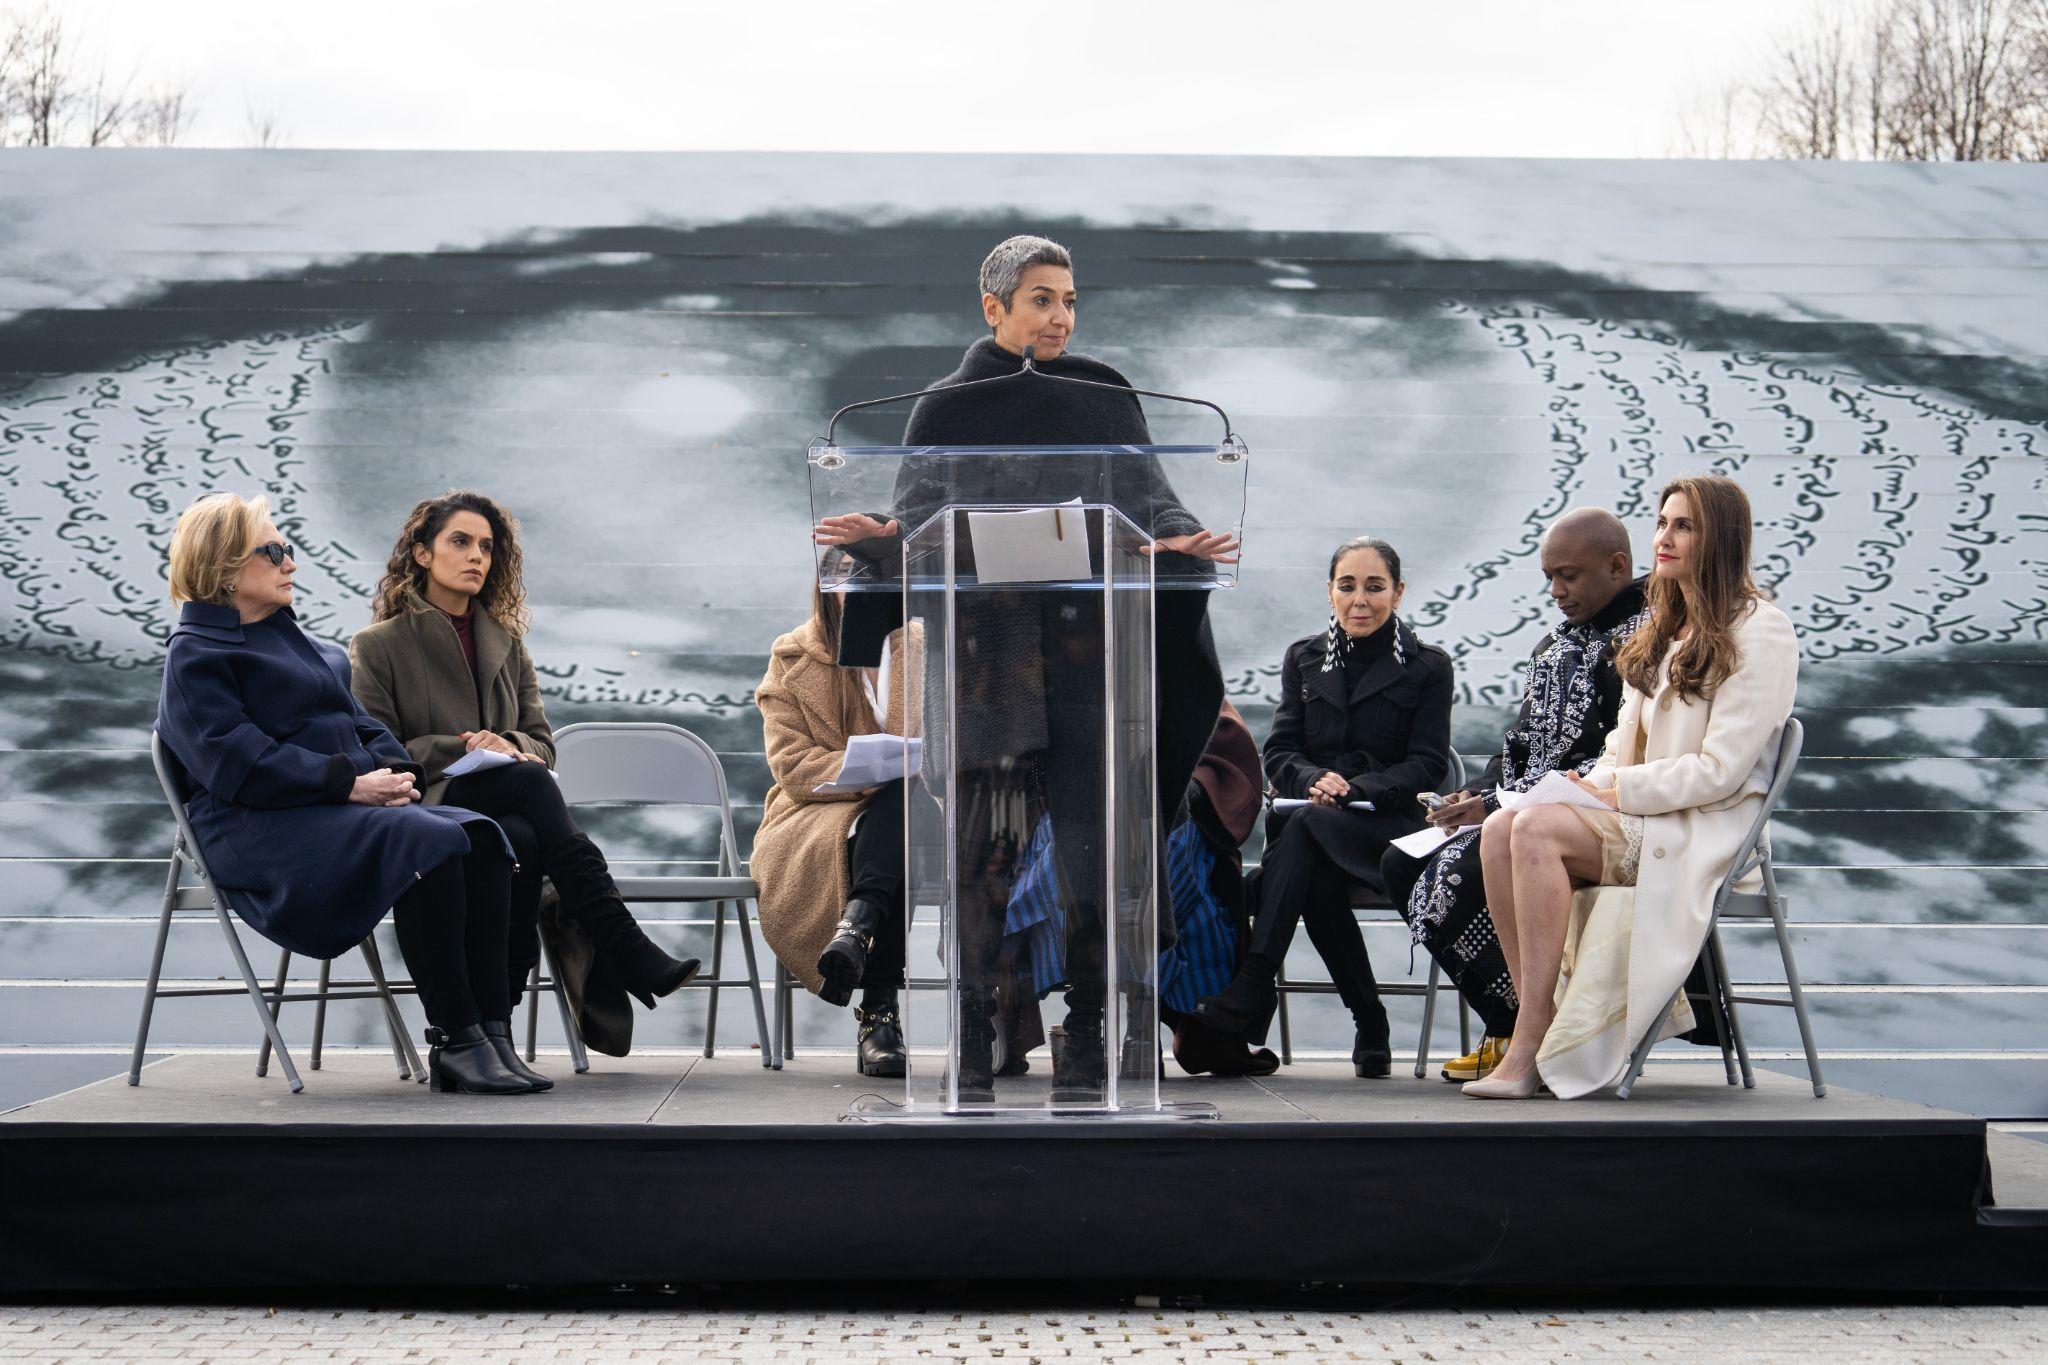 Zainab Salbi and, seated behind her. Hillary Rodham Clinton; Human Rights Lawyer and director of the Strategic Litigation Project at the Atlantic Council Gissou Nia; artists Sheida Soleimani and Shirin Neshat; Nazanin Afshin-Jam, and artist and activist Sepideh Moafi. Photo by Austin Paz. Courtesy For Freedoms.